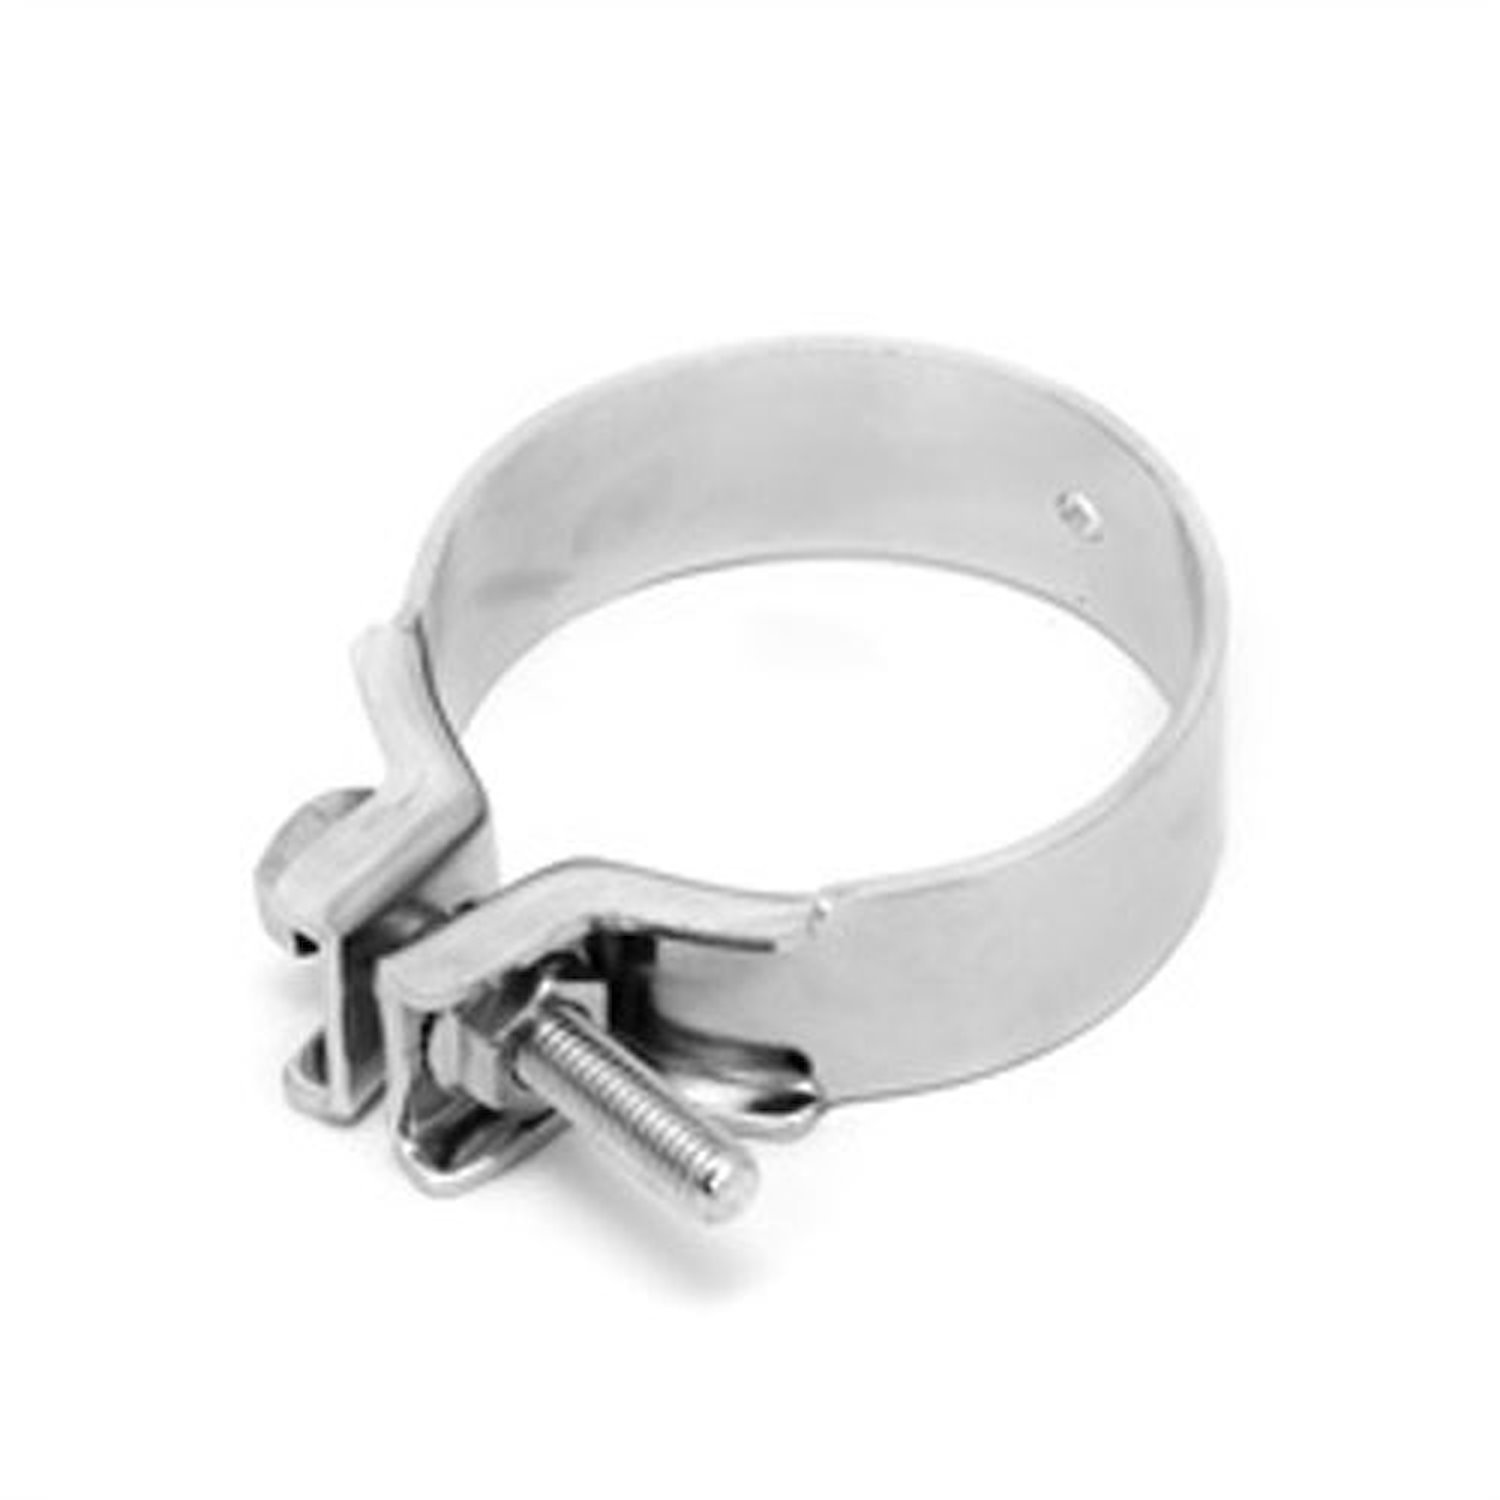 Exhaust Clamp 2-3/4 Inch Band Style Stainless Steel Universal Application